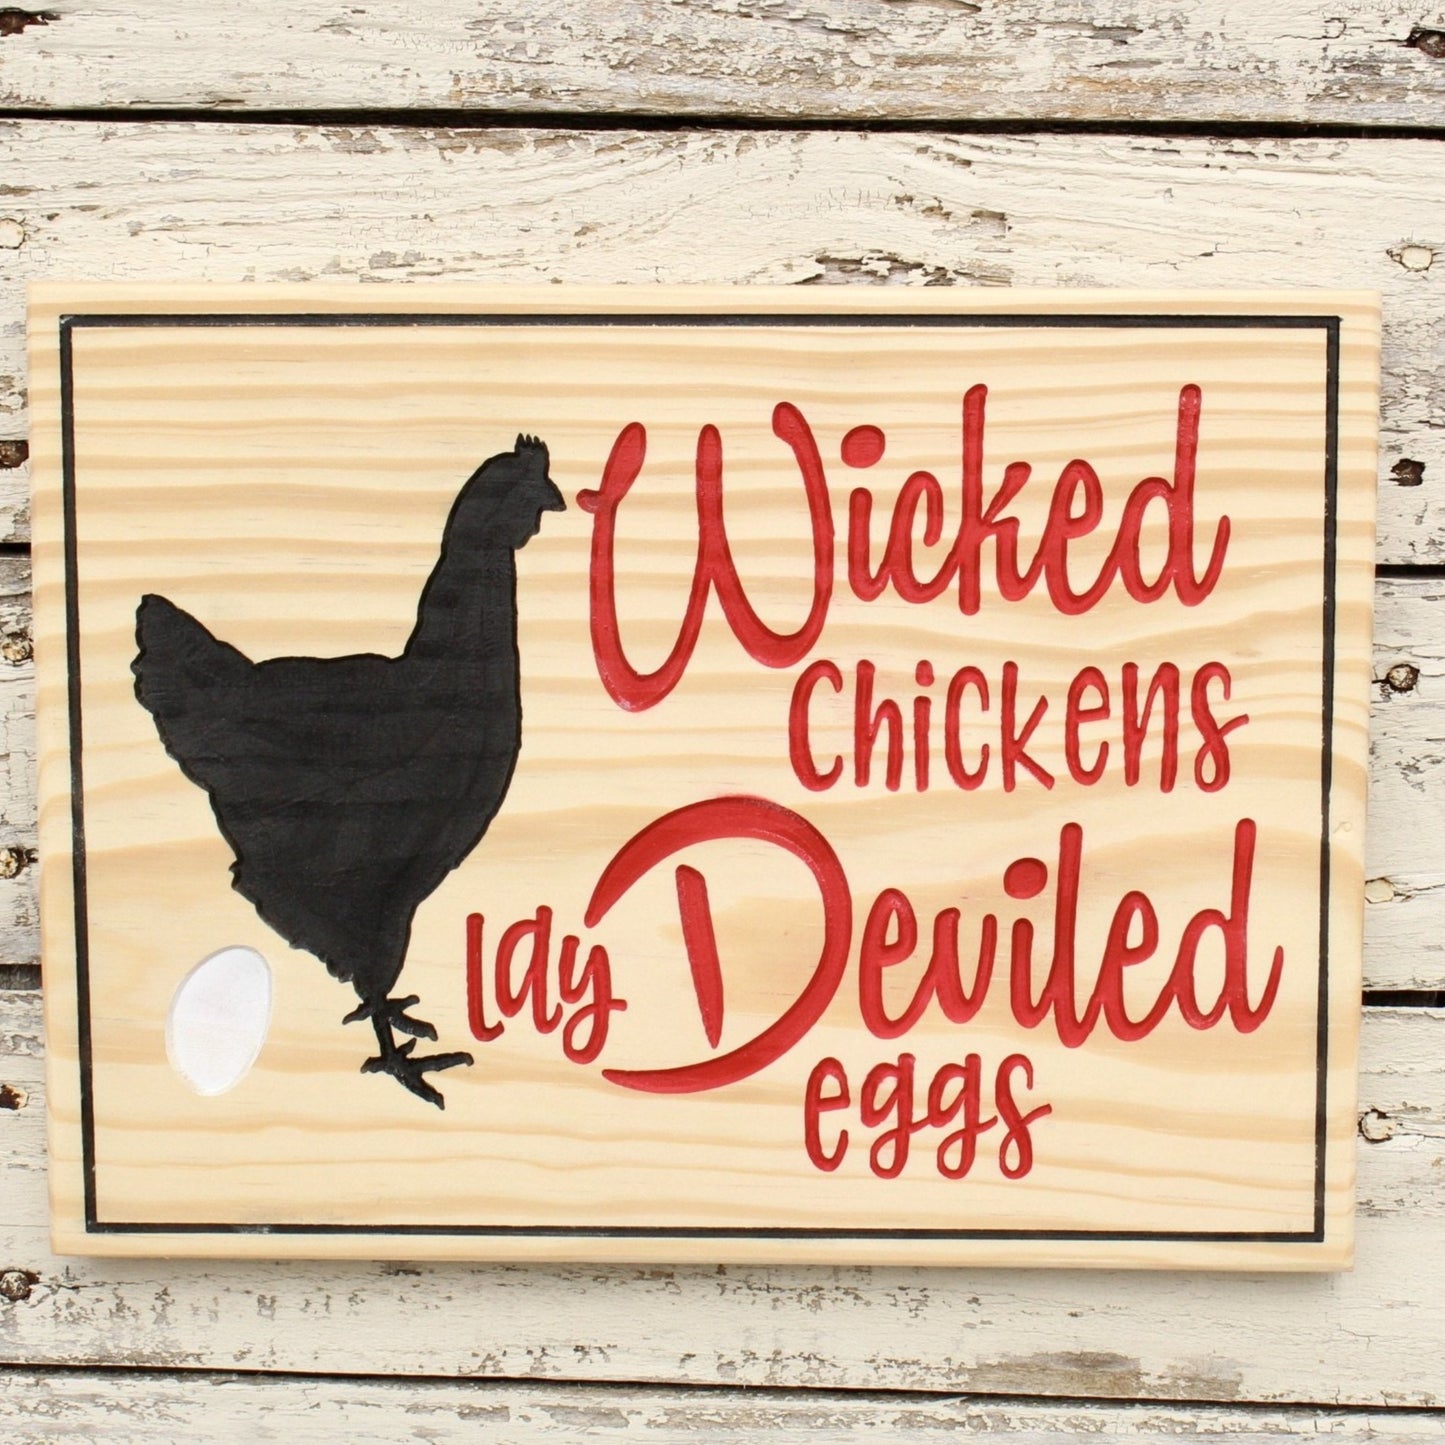 Wicked chickens lay deviled eggs, engraved wood sign, funny kitchen signs